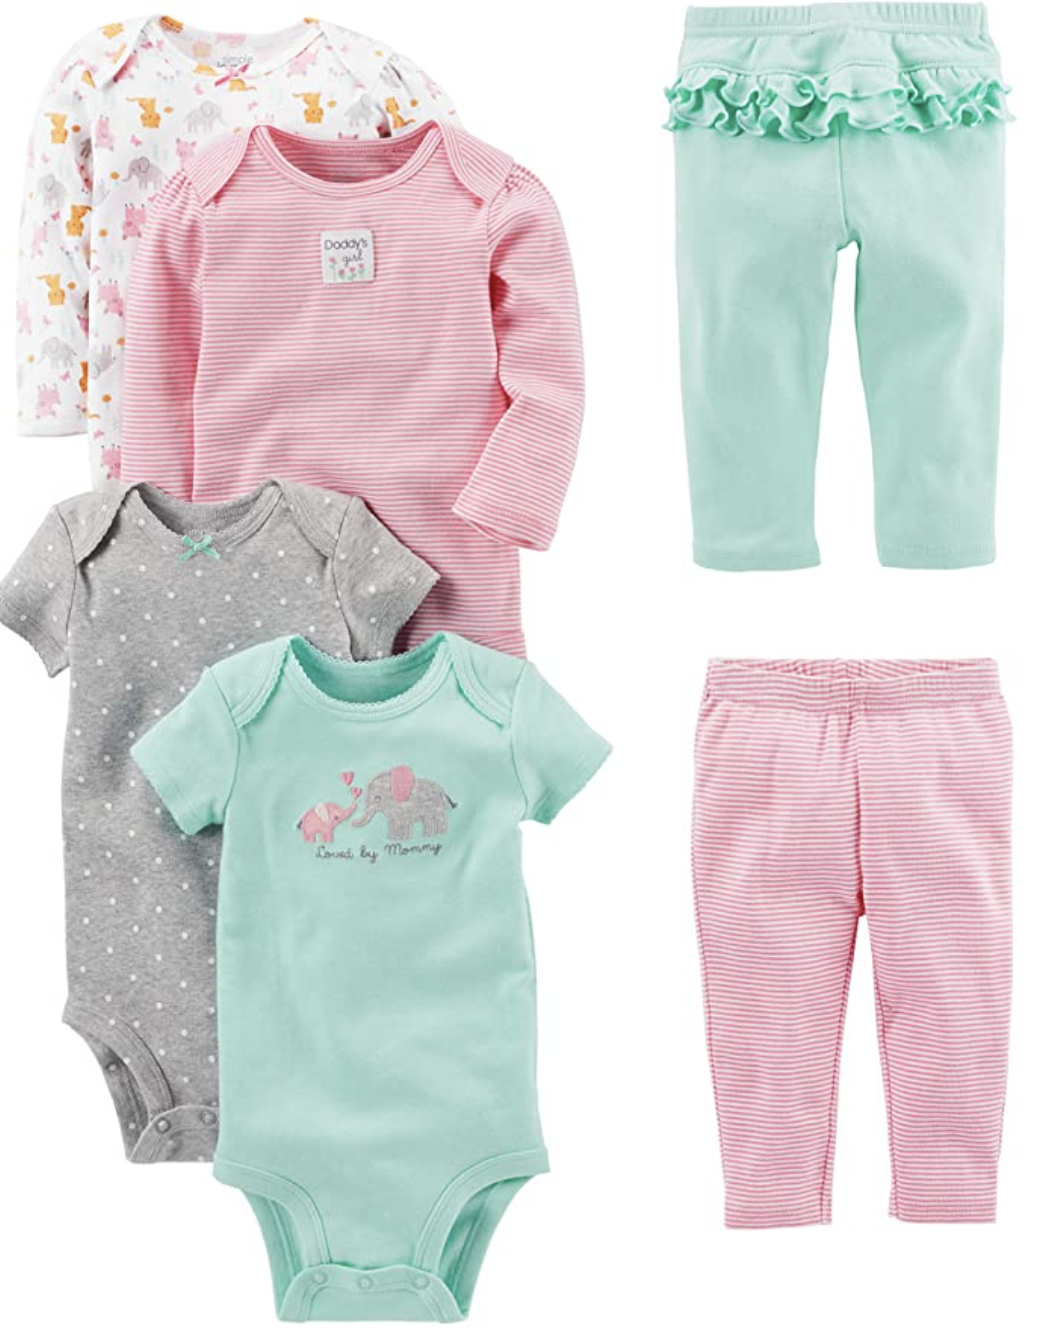 Four onesies in different gray, pink, and seafoam colors and two pairs of matching pants